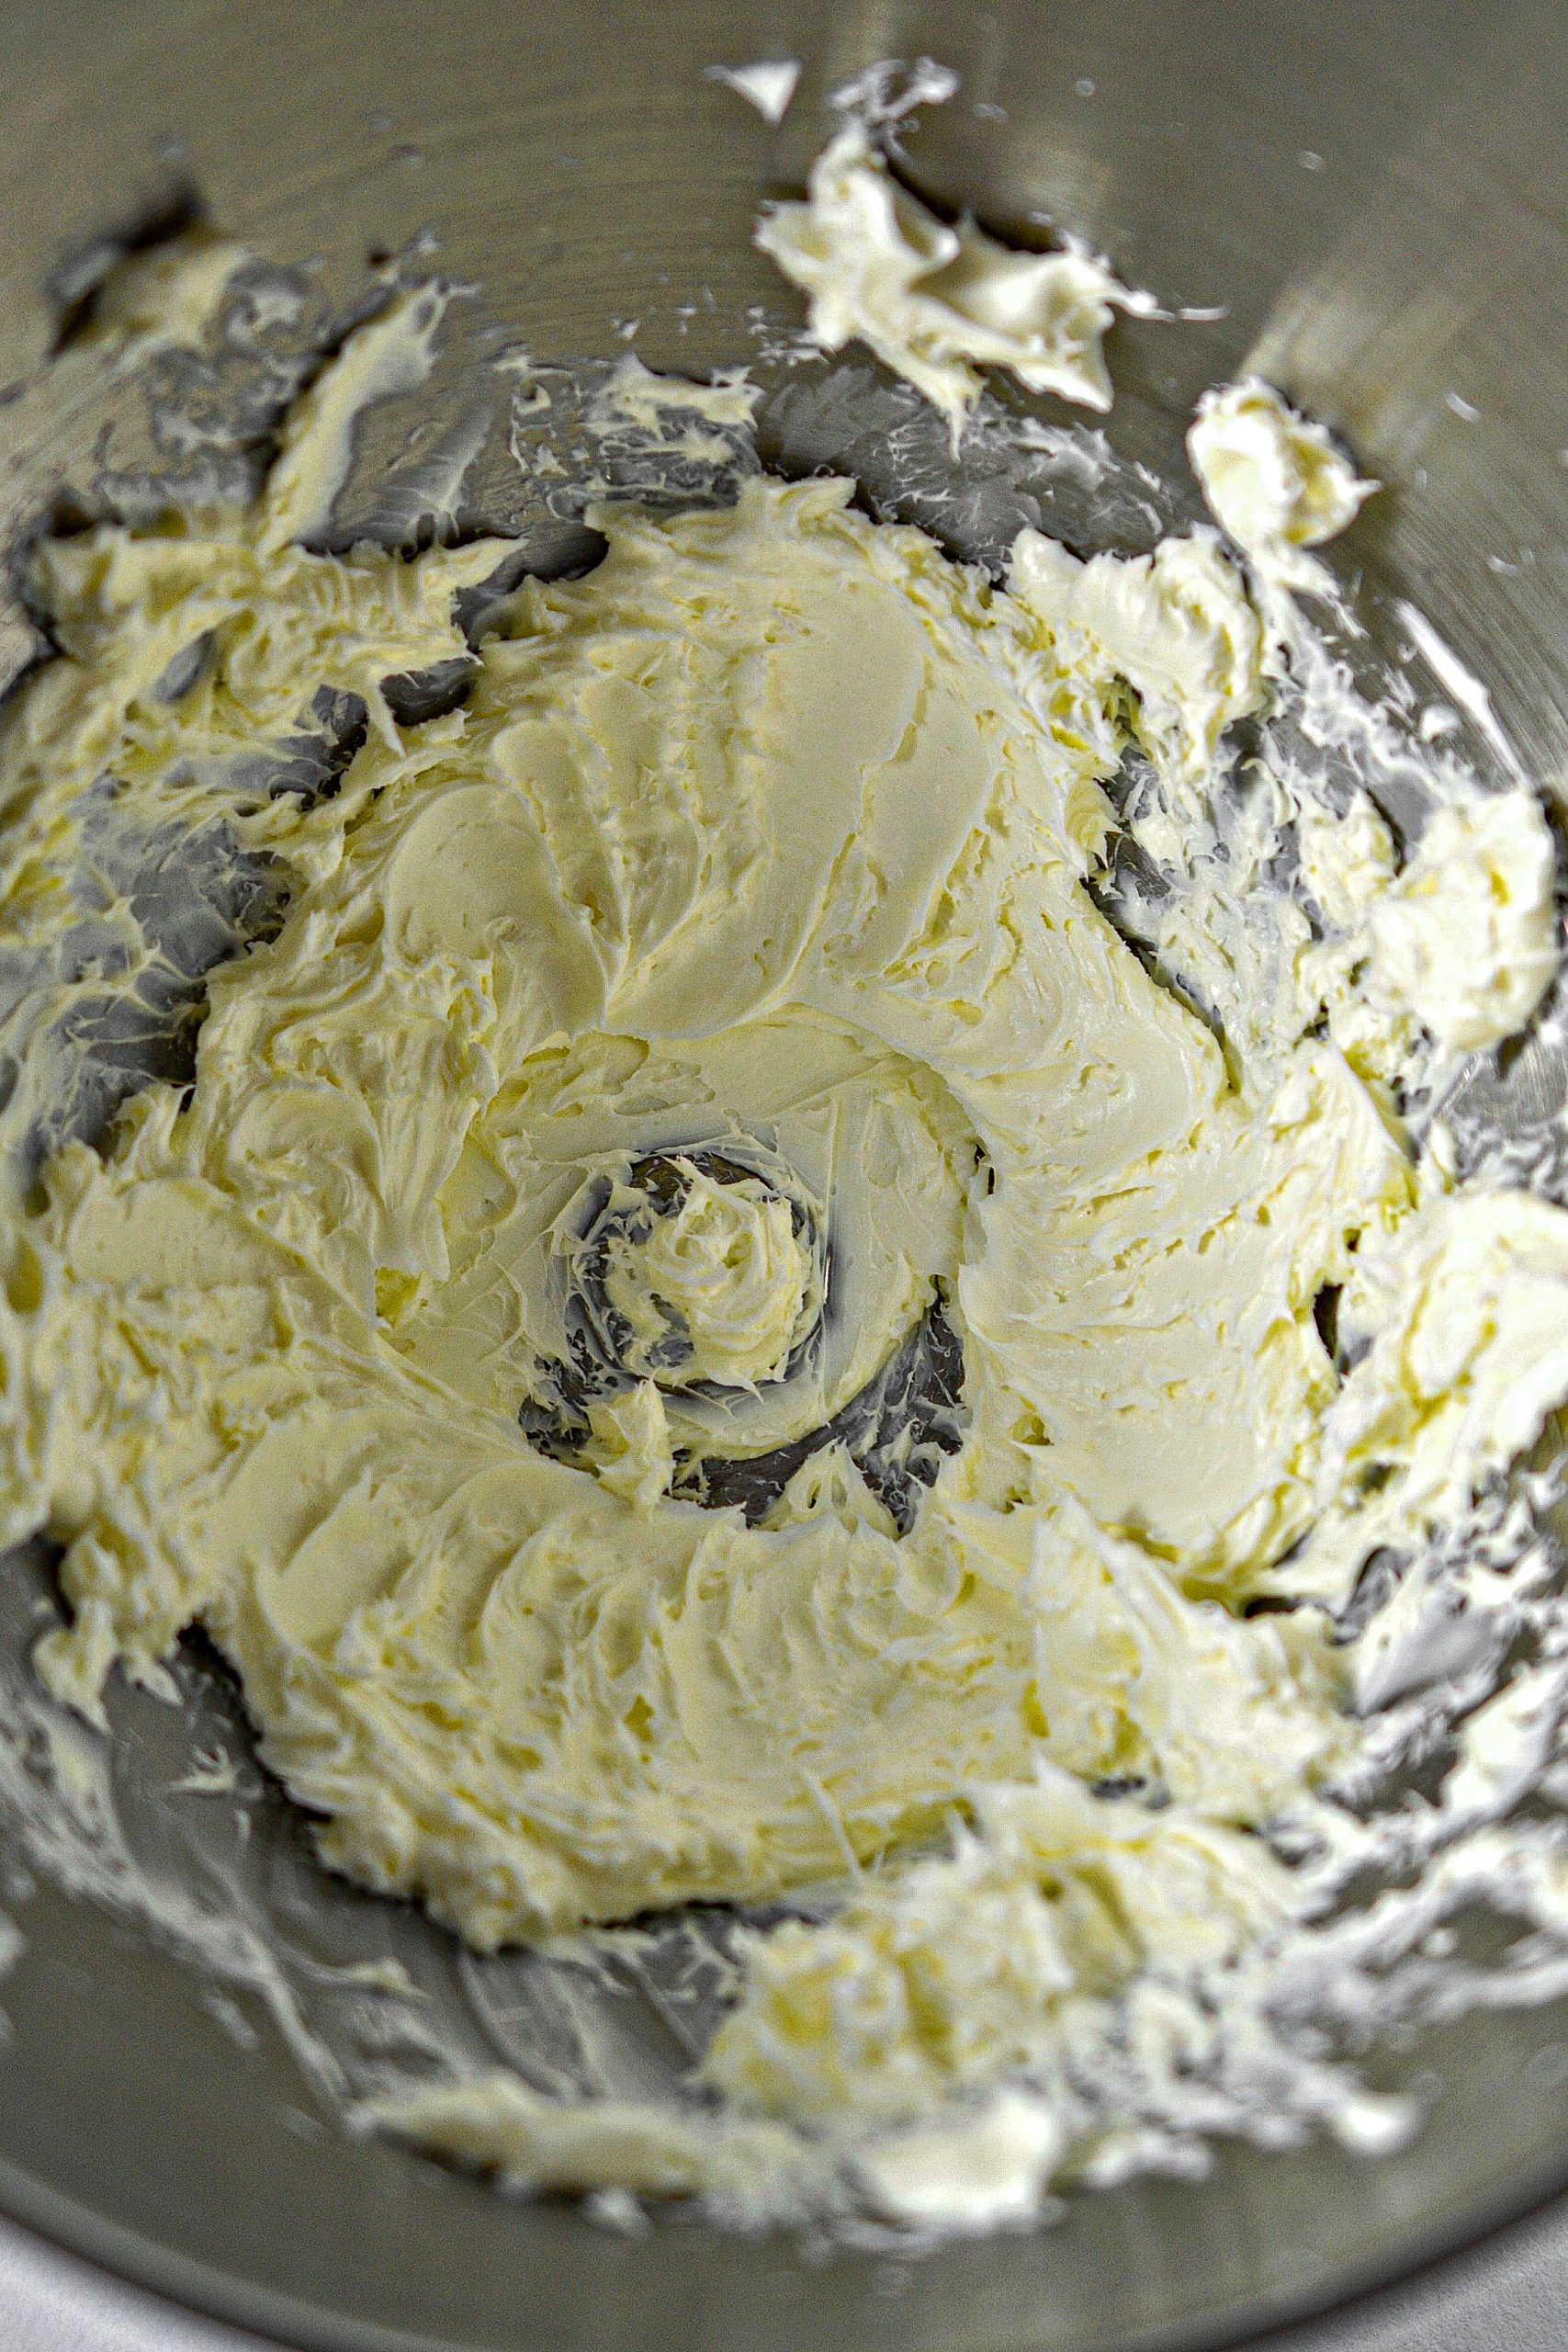  Blend the cream cheese until it is smooth and creamy.